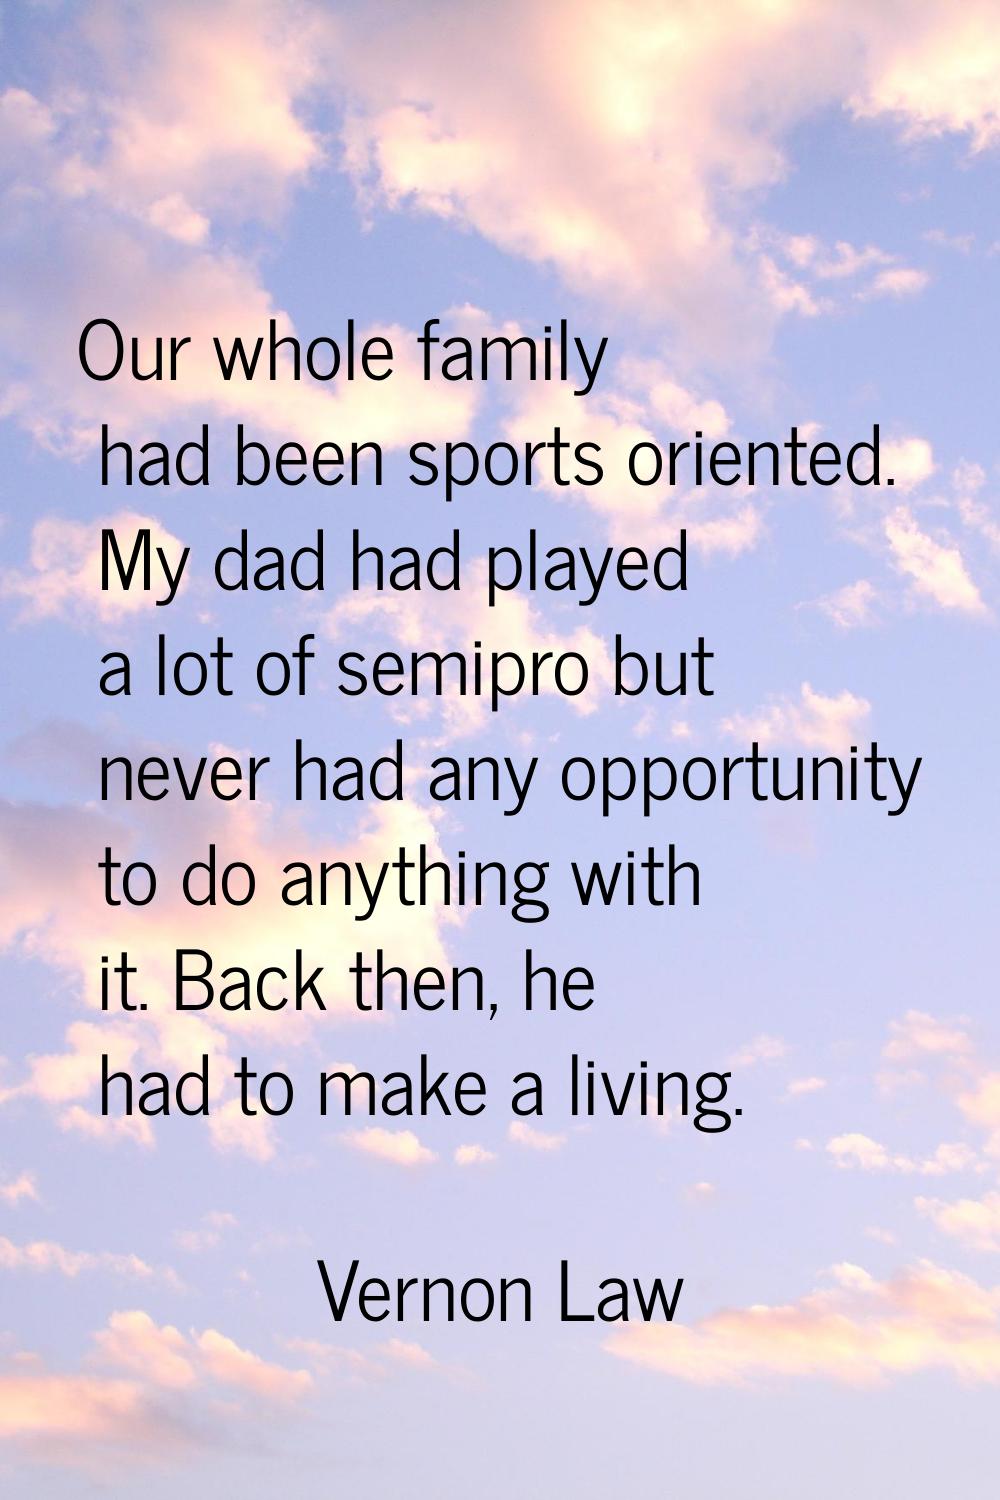 Our whole family had been sports oriented. My dad had played a lot of semipro but never had any opp